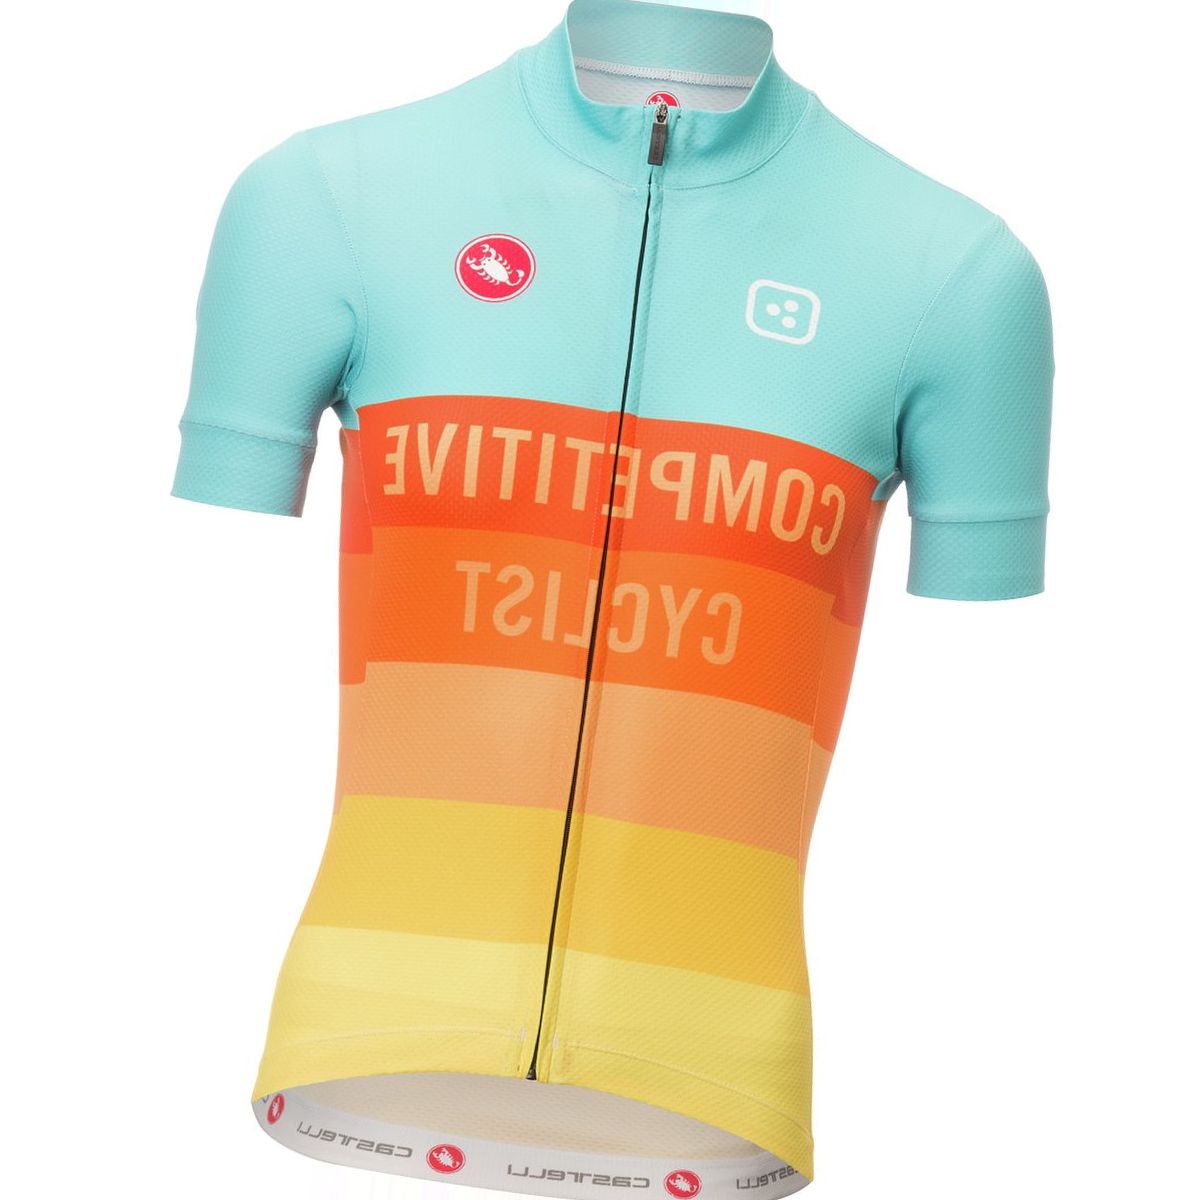 Castelli Competitive Cyclist Club Jersey - Women's